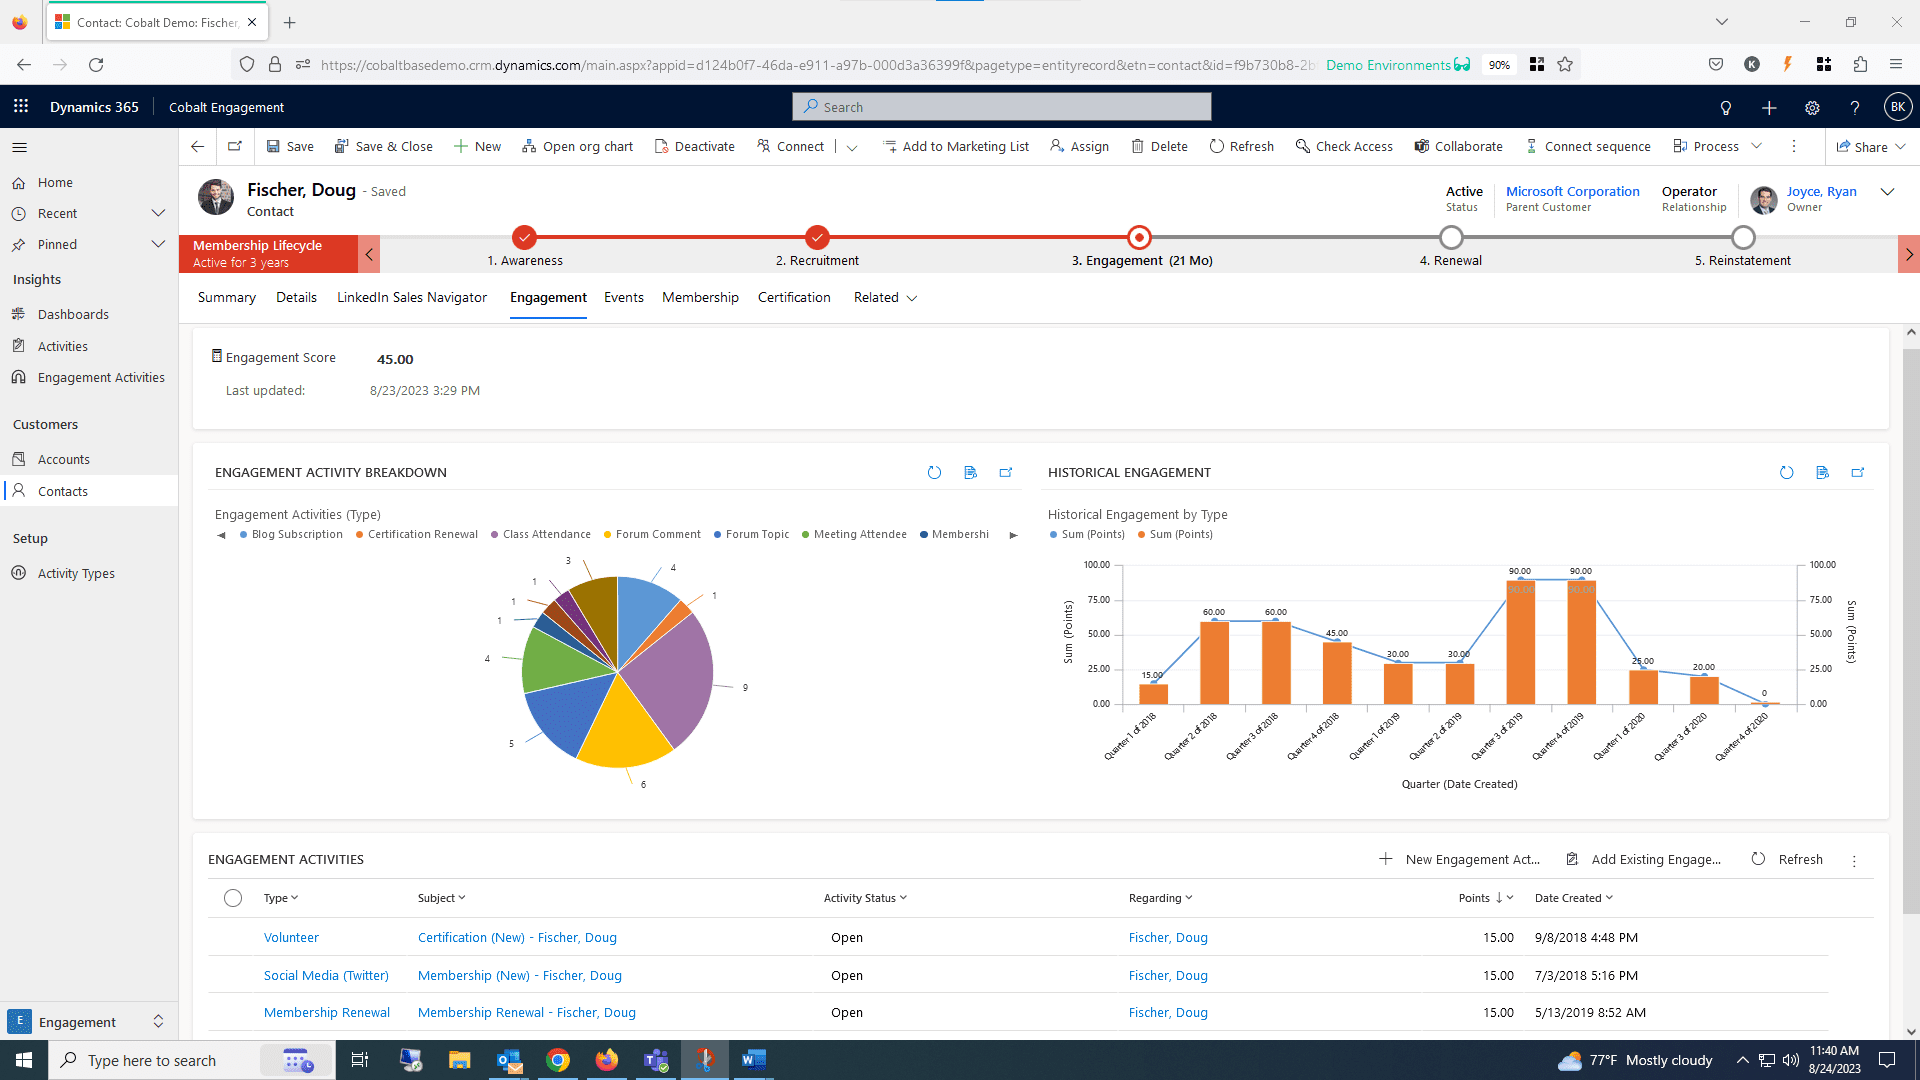 A screenshot of the member engagement module in Cobalt's association management software. The image contains a multi-colored pie chart representing the different engagement points for a contact in the AMS system, a bar graph showing the contact's historical engagement score over time, and part of a list of engagement activities associated with the contact.